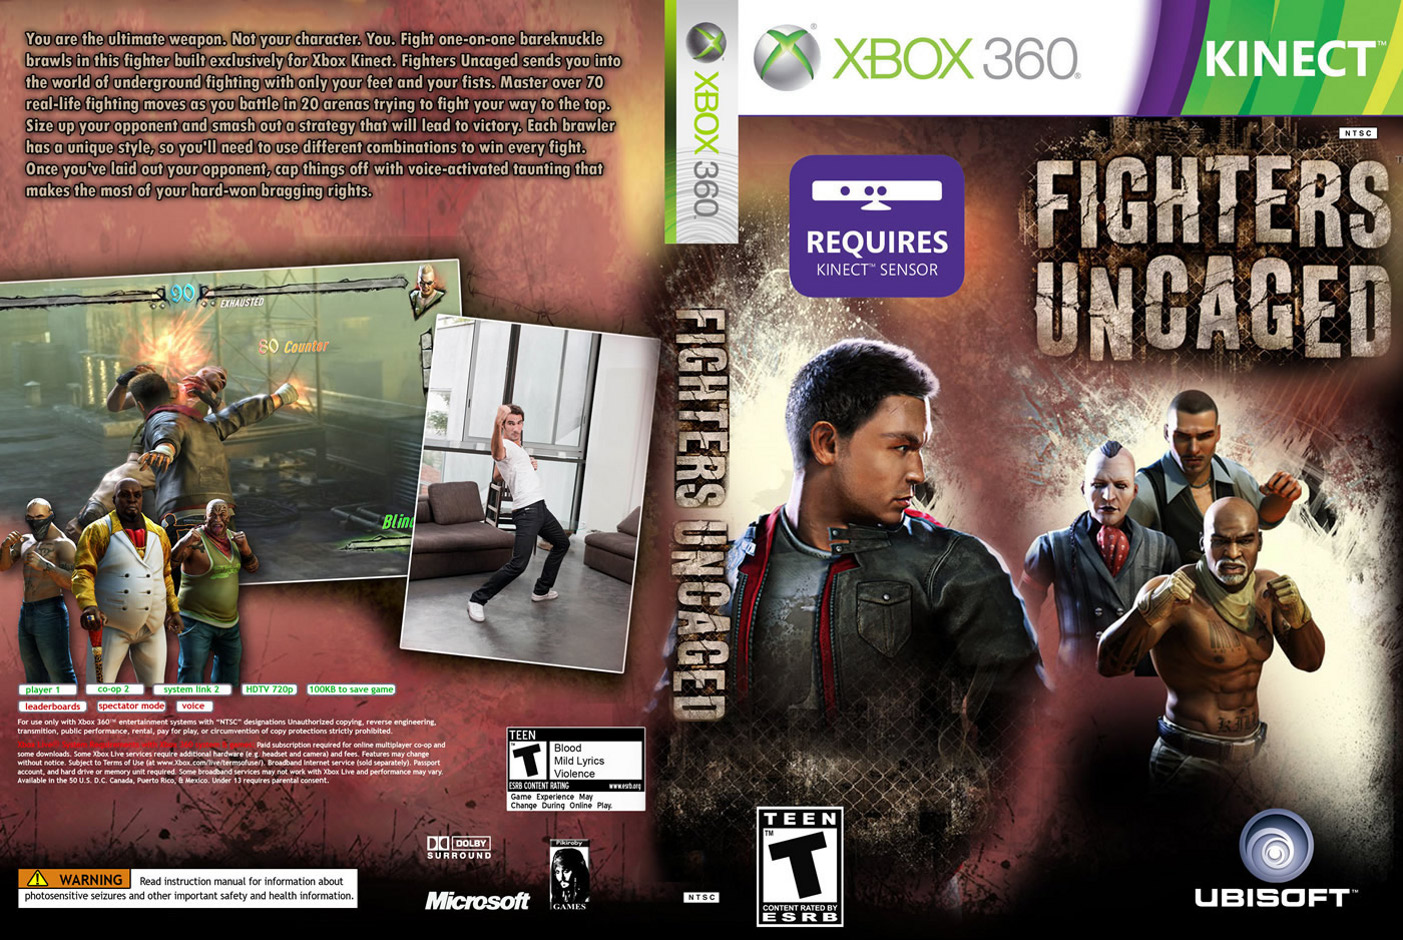 Xbox 360 games download. Fighters Uncaged Xbox 360 Kinect. Fighters Uncaged (Xbox 360 Kinect) lt+3.0. Fighters Uncaged Xbox 360 Cover. Fighters Uncaged Xbox 360 обложка.